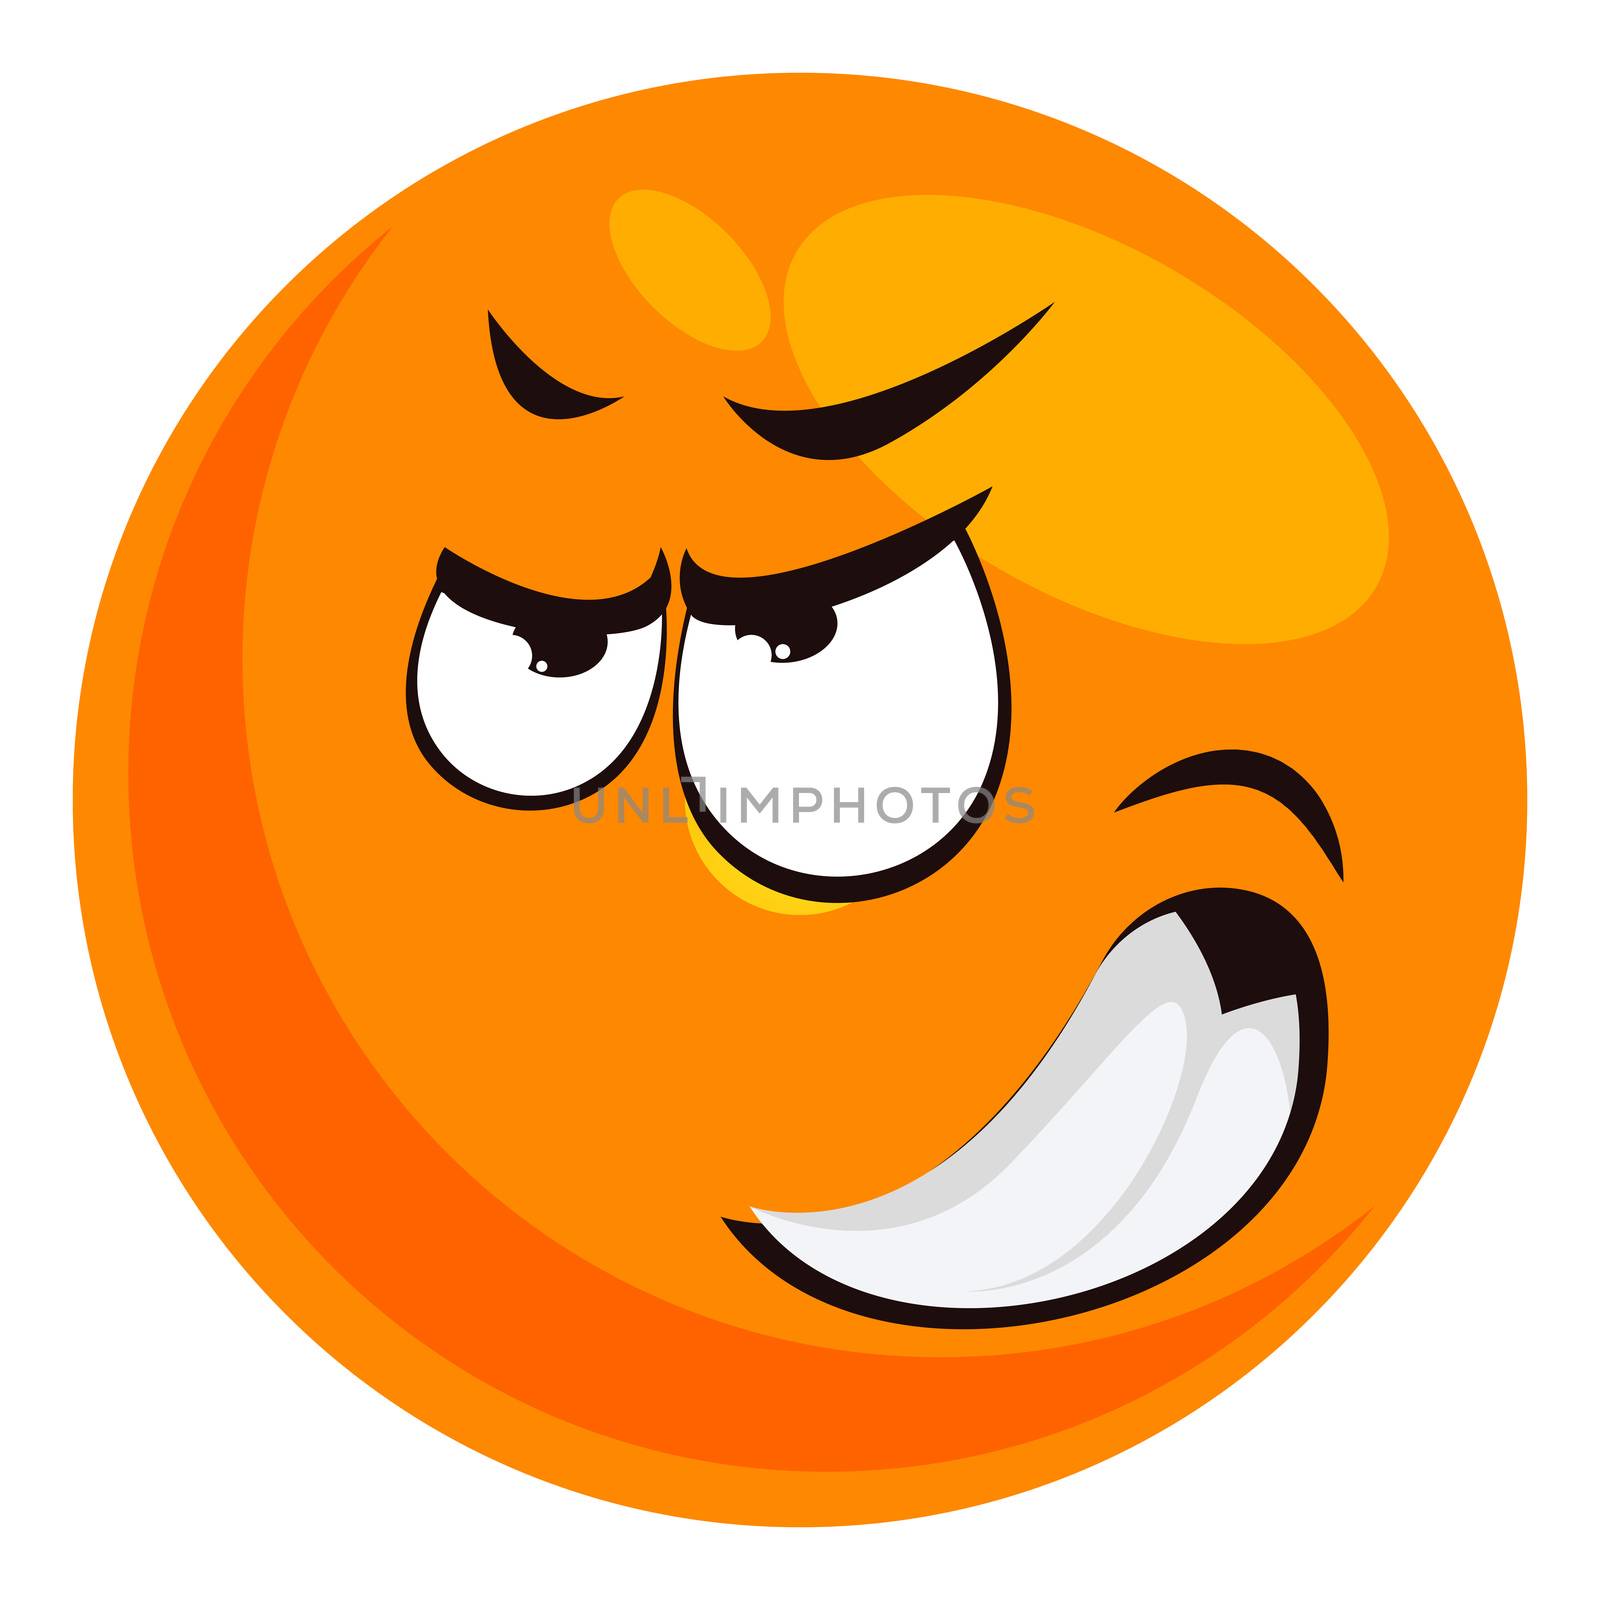 Angry emoji, illustration, vector on white background